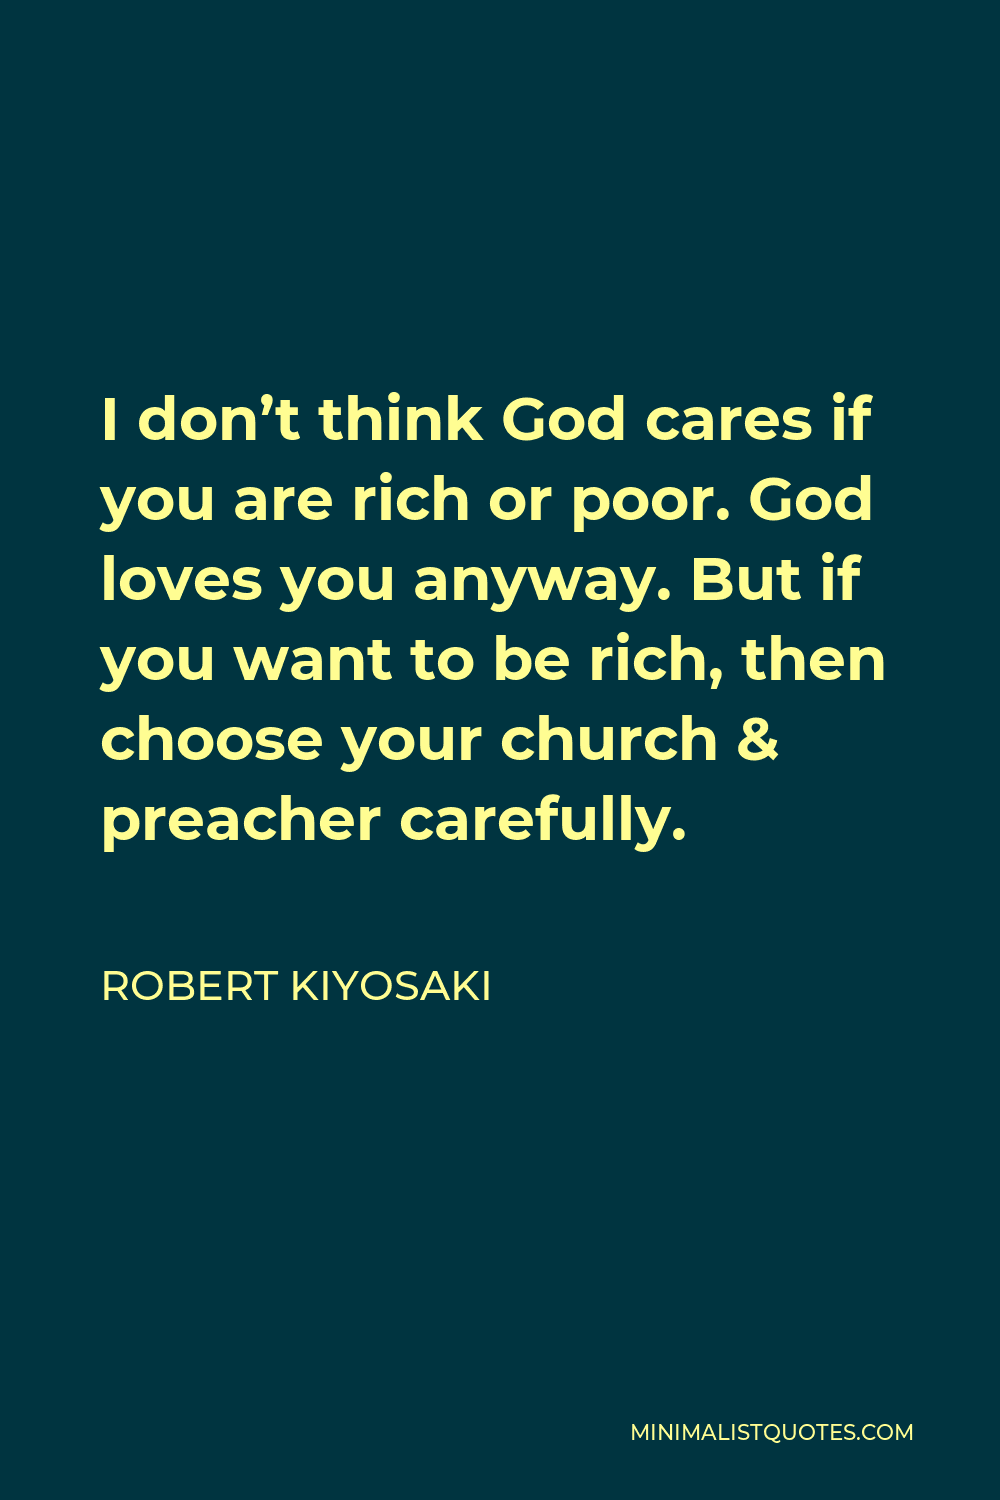 Robert Kiyosaki Quote - I don’t think God cares if you are rich or poor. God loves you anyway. But if you want to be rich, then choose your church & preacher carefully.